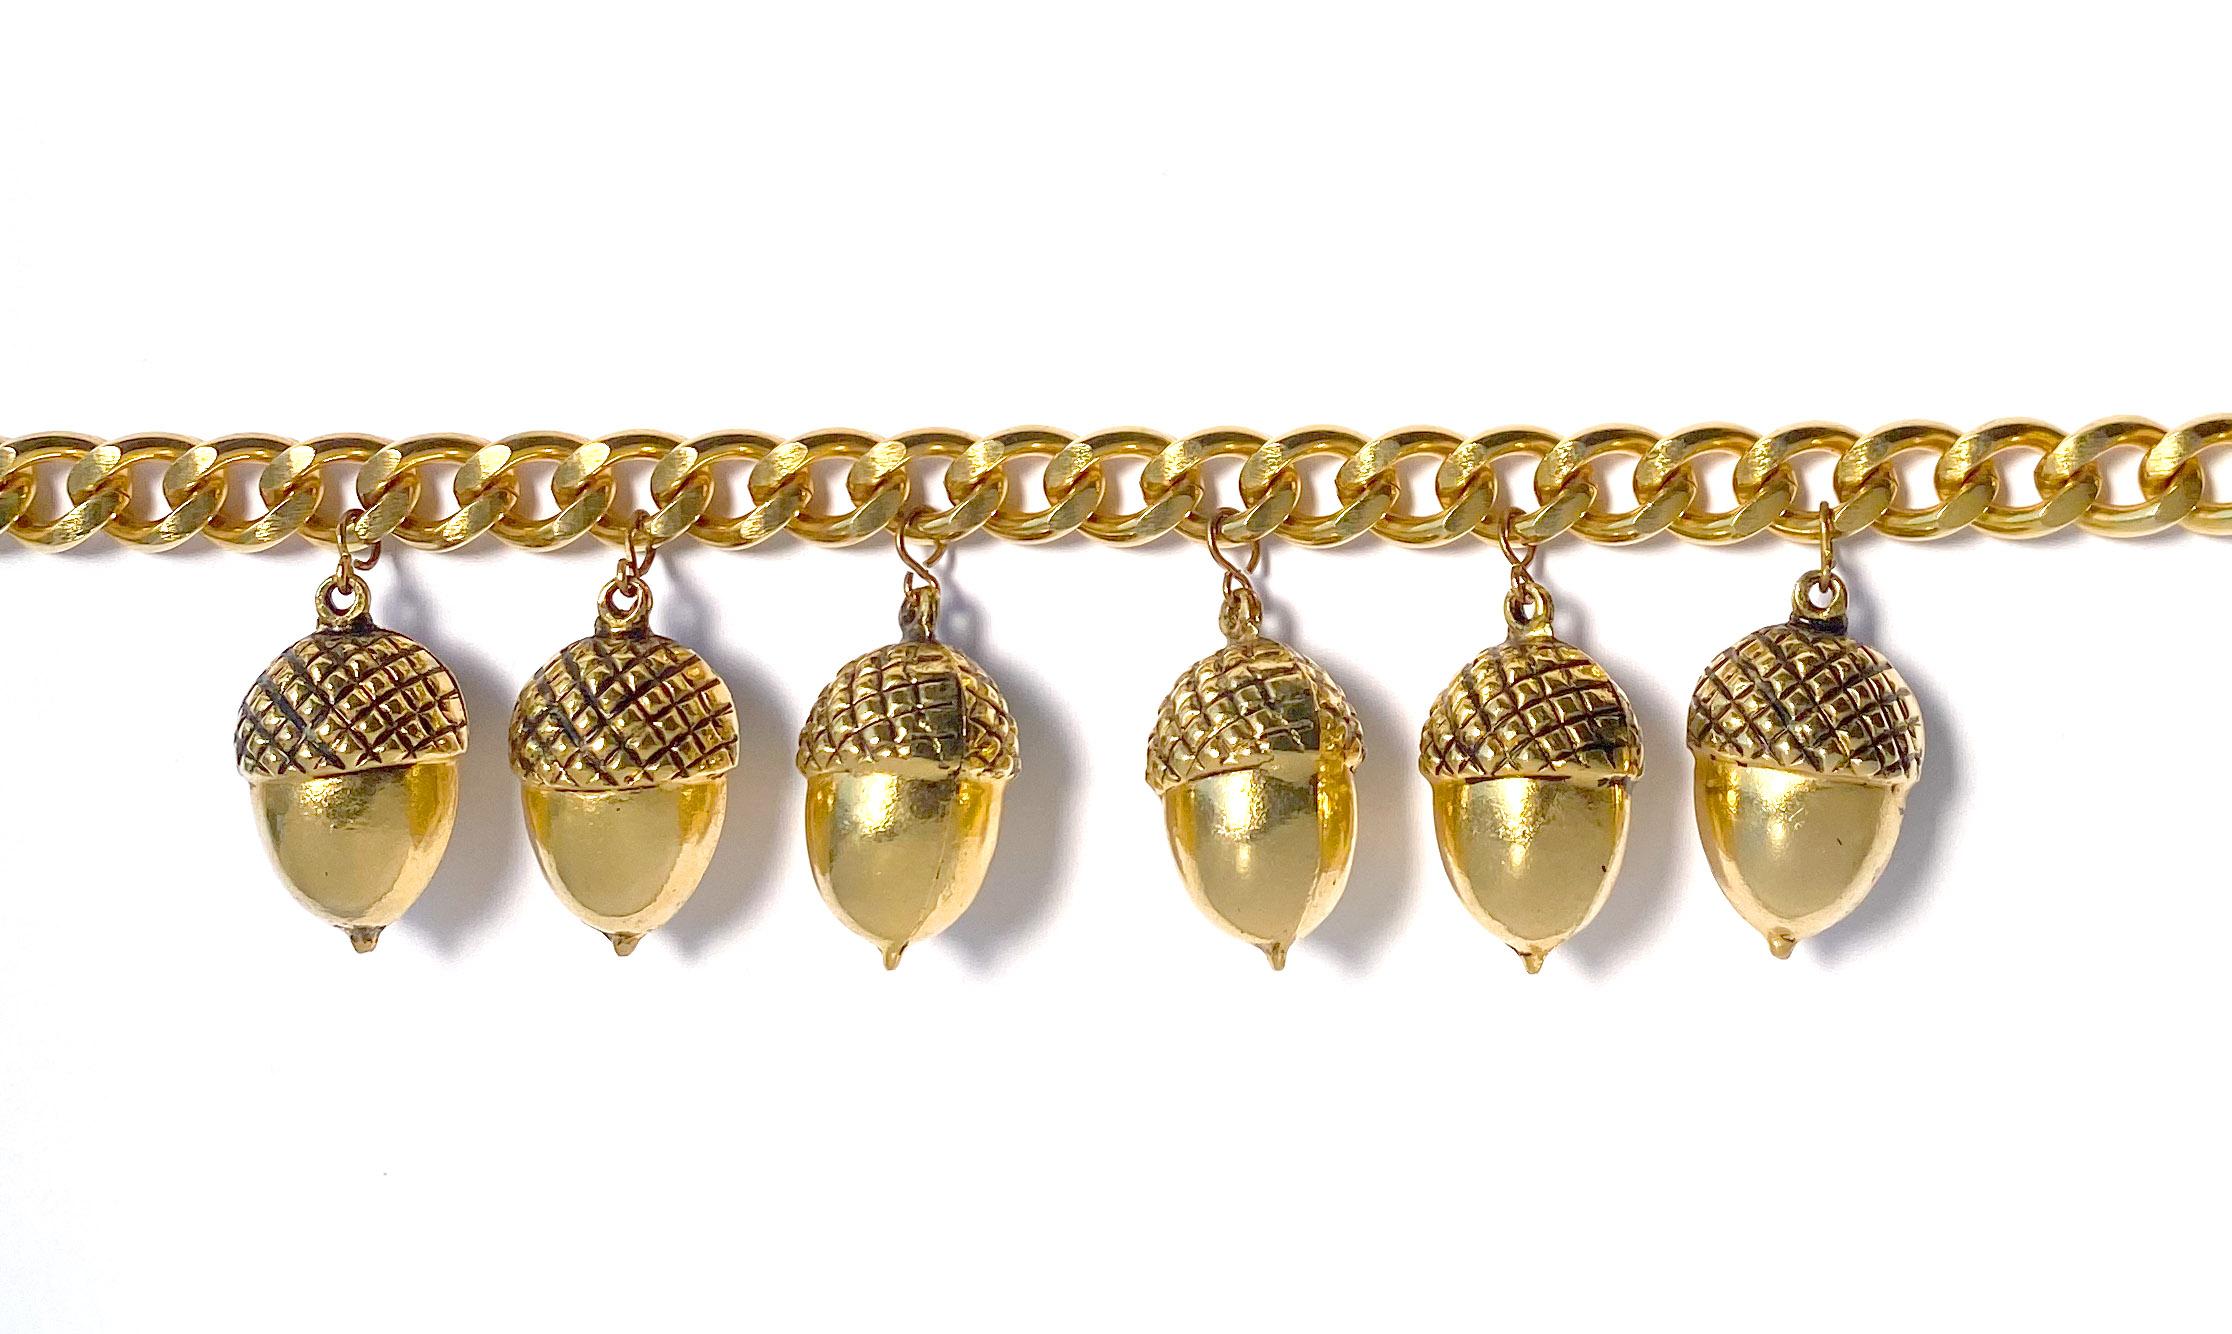 Vintage 1980s Yves Saint Laurent necklace in gold plate.  This heritage statement necklace comprises a flat, wide curb chain in a choker length, featuring six acorn pendants.  

The necklace measures 15.25 inches in length with an extension chain of